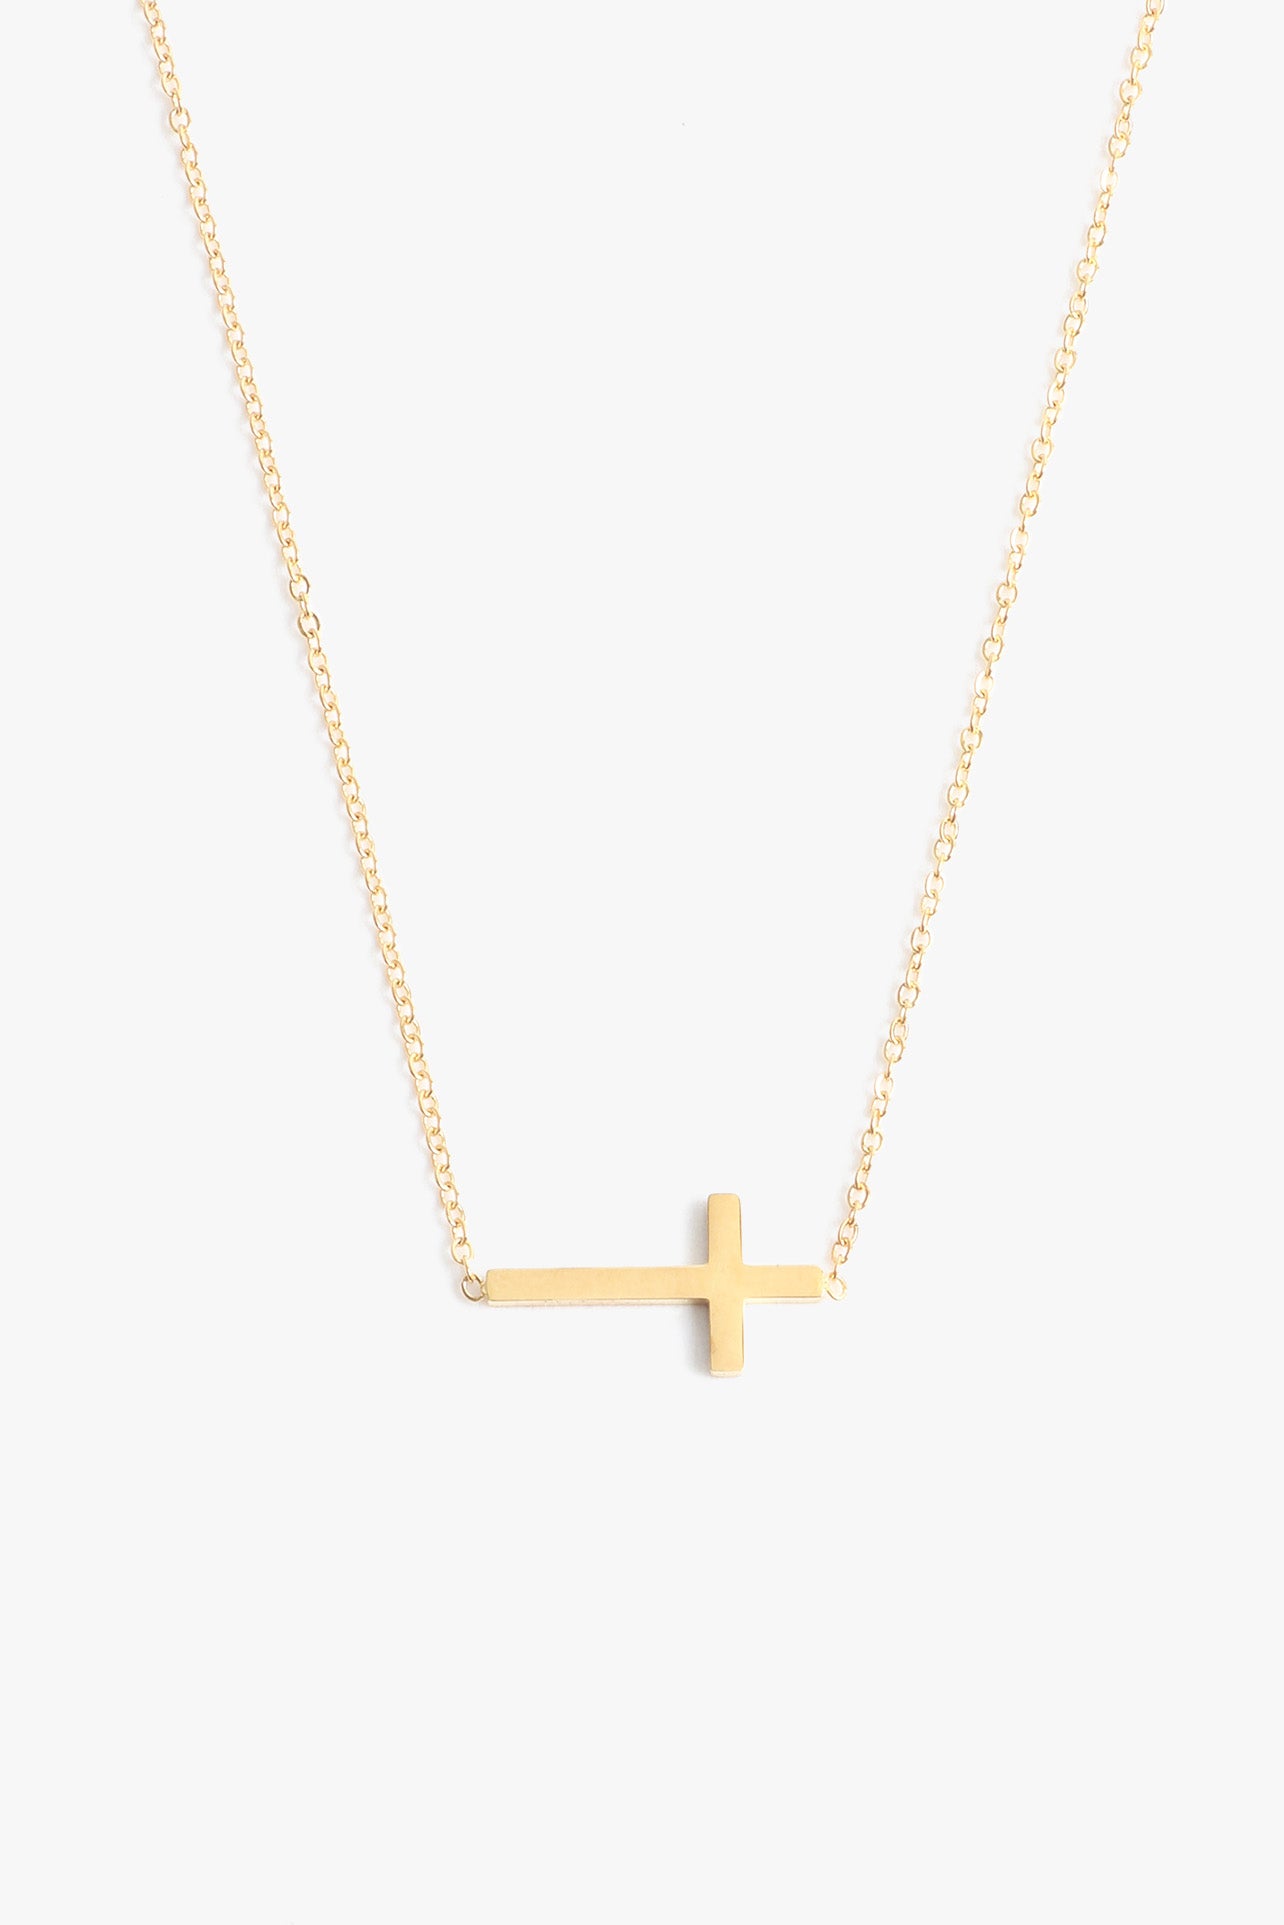 Marrin Costello Jewelry Barry Necklace sideways cross necklace with lobster clasp closure and extender. Waterproof, sustainable, hypoallergenic. 14k gold plated stainless steel.